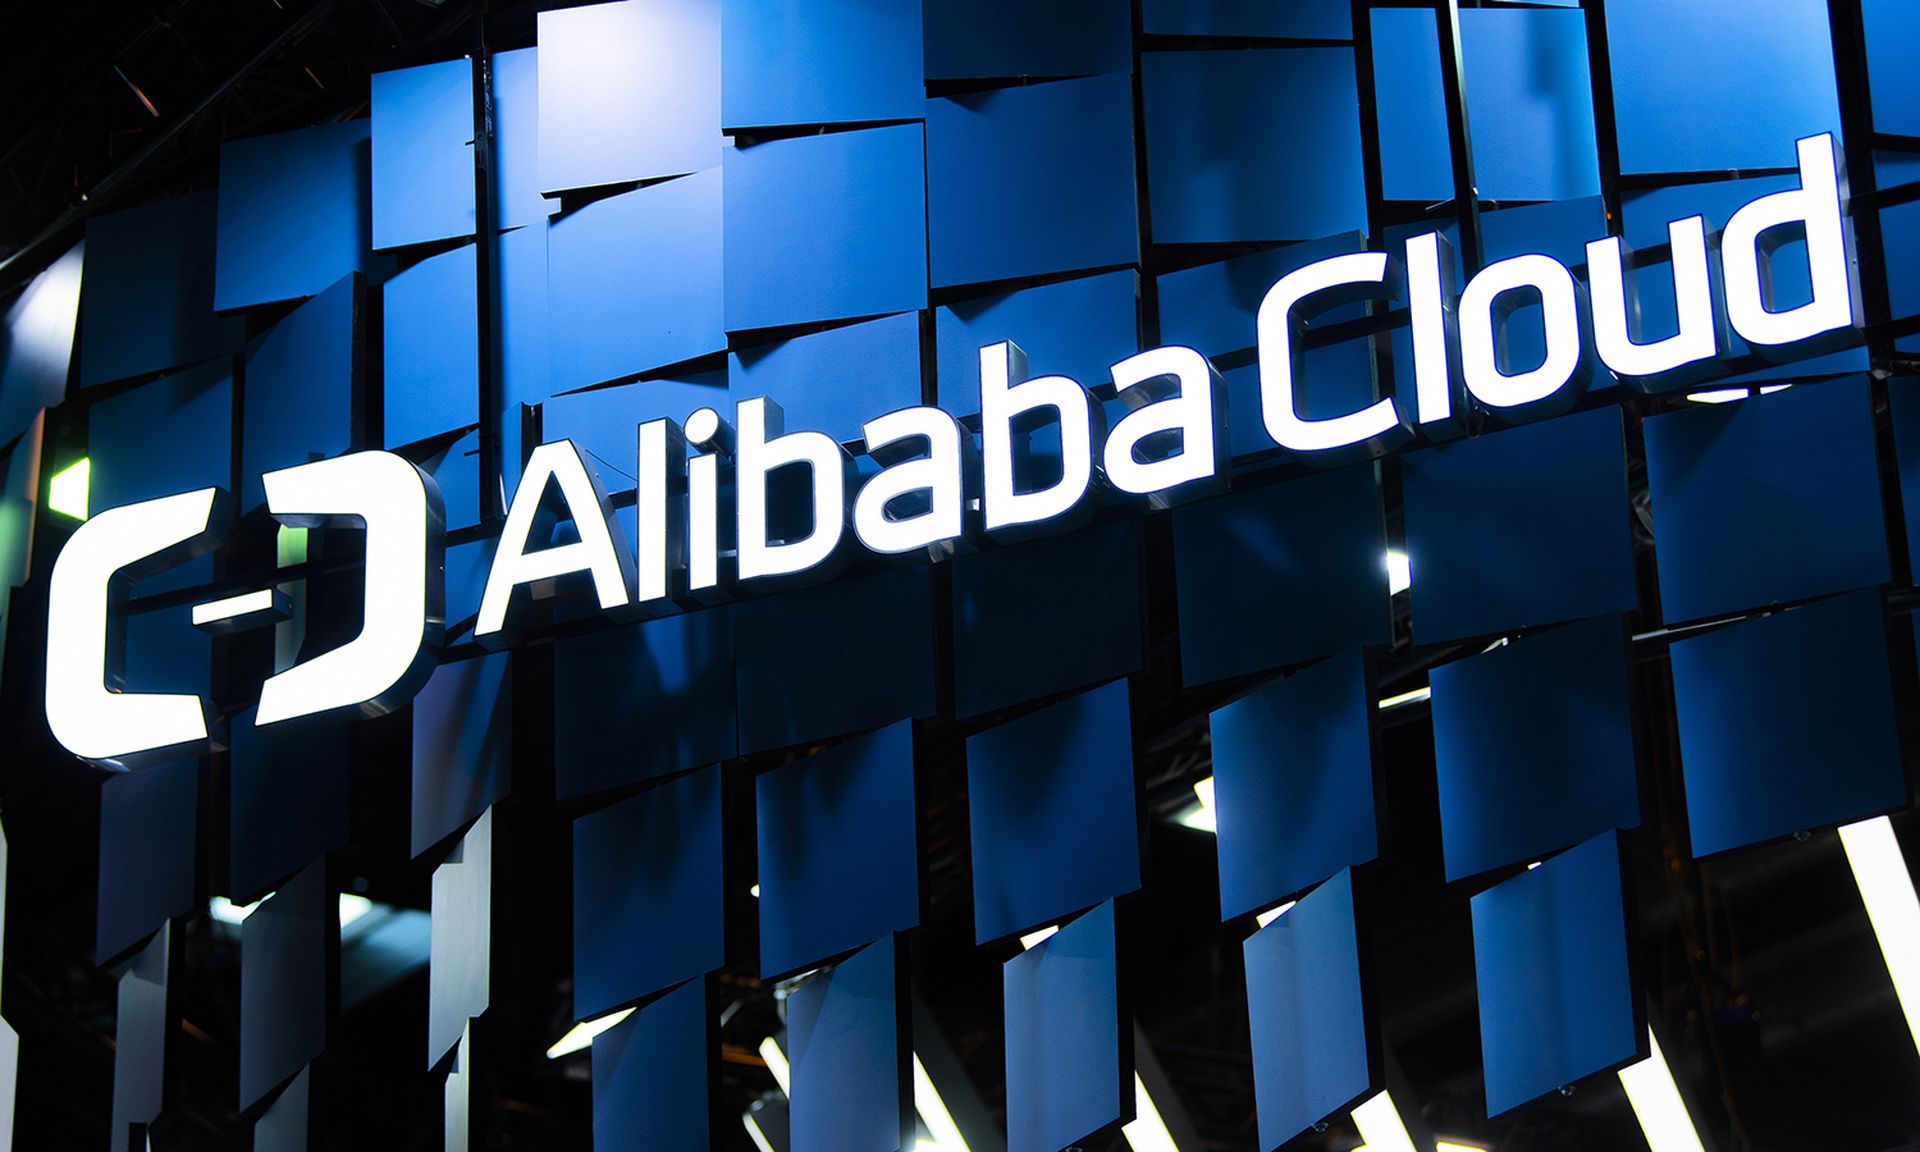 A logo sits illuminated outside the Alibaba Cloud booth on day 2 of the GSMA Mobile World Congress 2019 on Feb. 26, 2019, in Barcelona, Spain. (Photo by David Ramos/Getty Images)